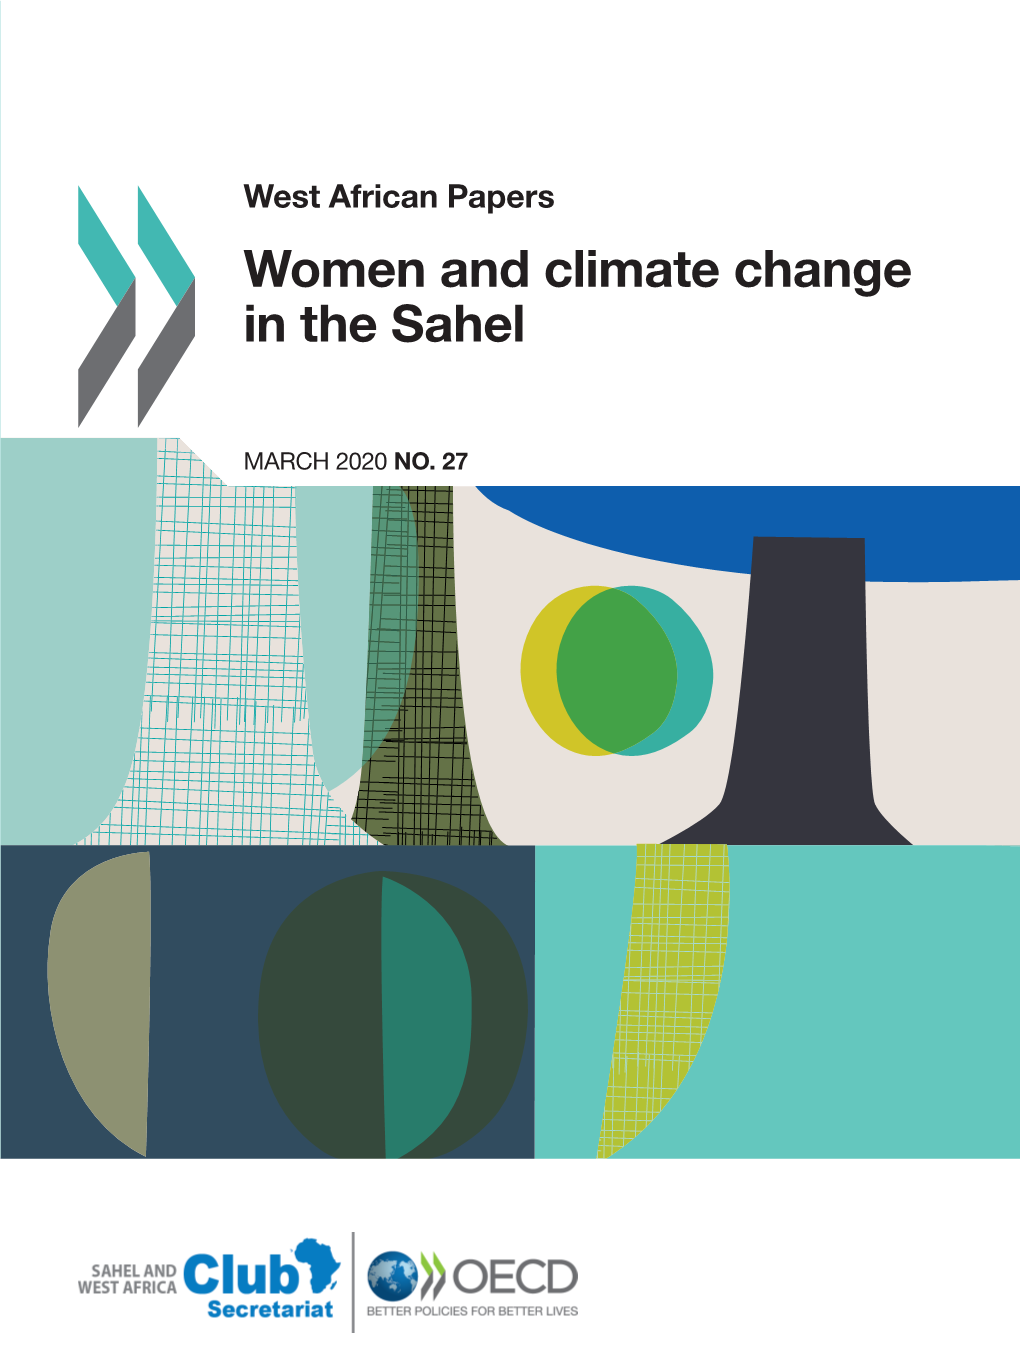 West African Papers Women and Climate Change in the Sahel